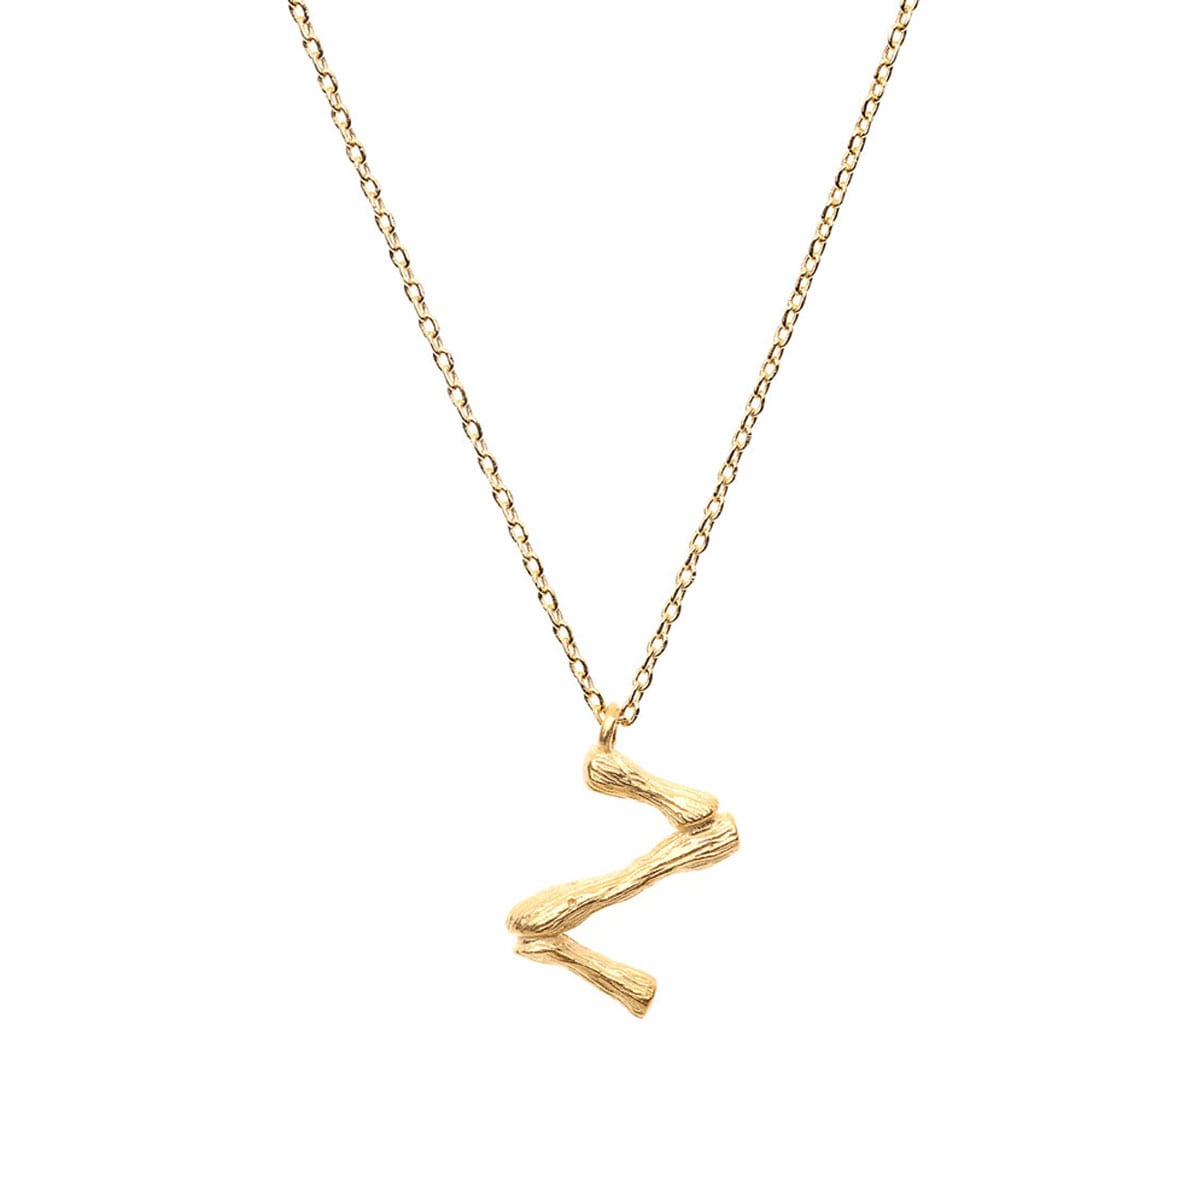 LETTER NECKLACE  - 24K GOLD PLATED - AMBER SCEATS